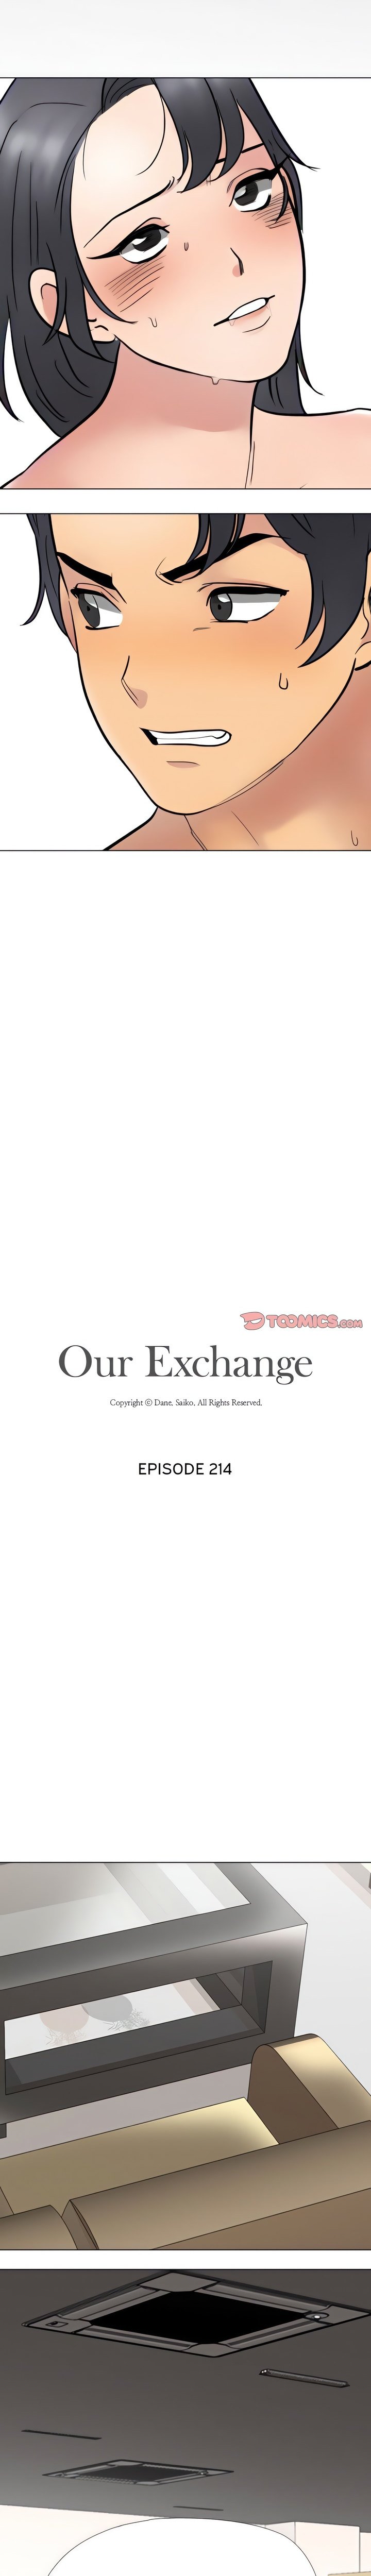 our-exchange-chap-214-1